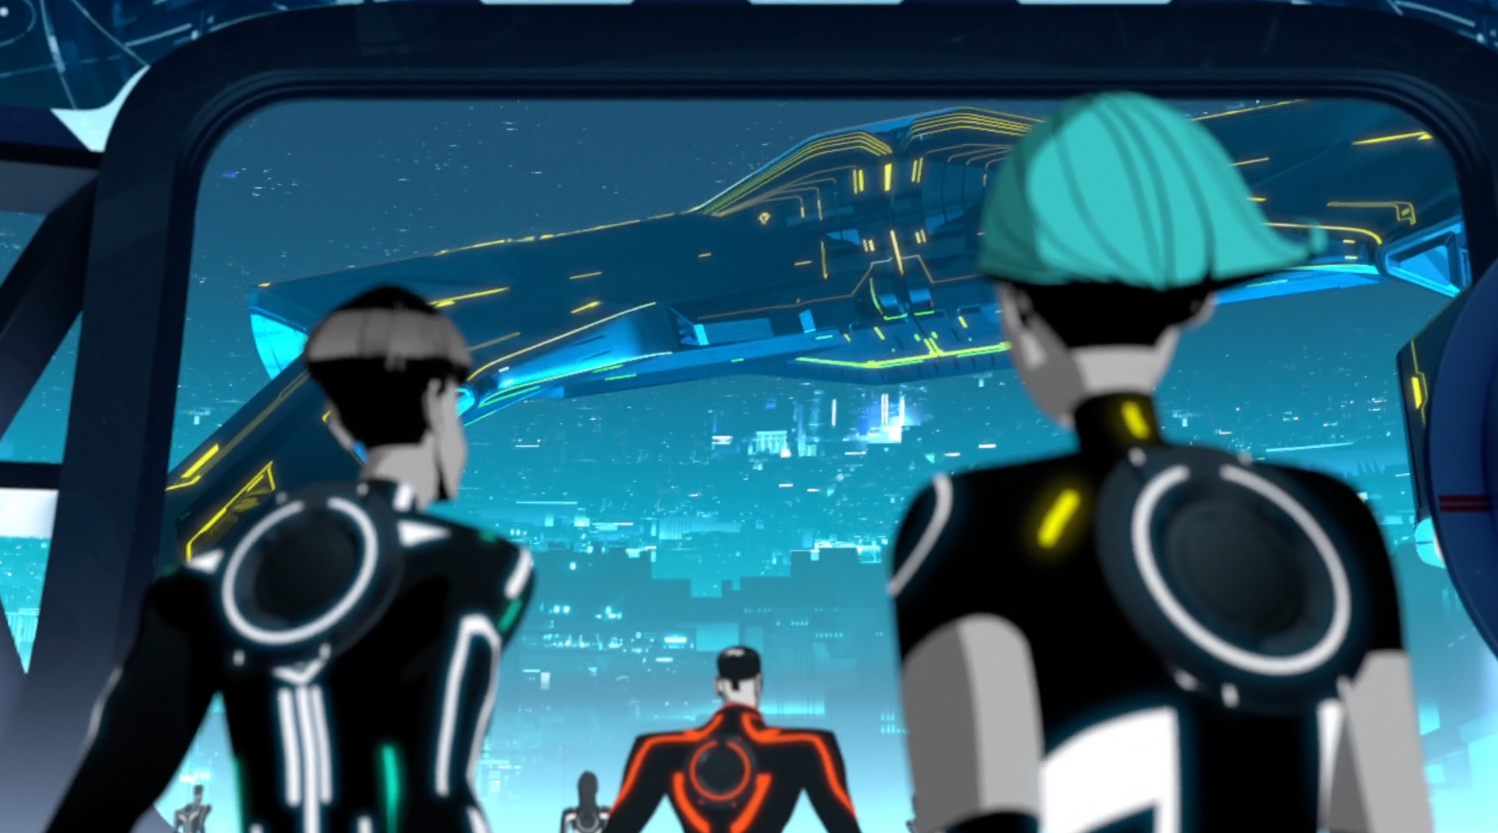 Tron: Uprising Picture